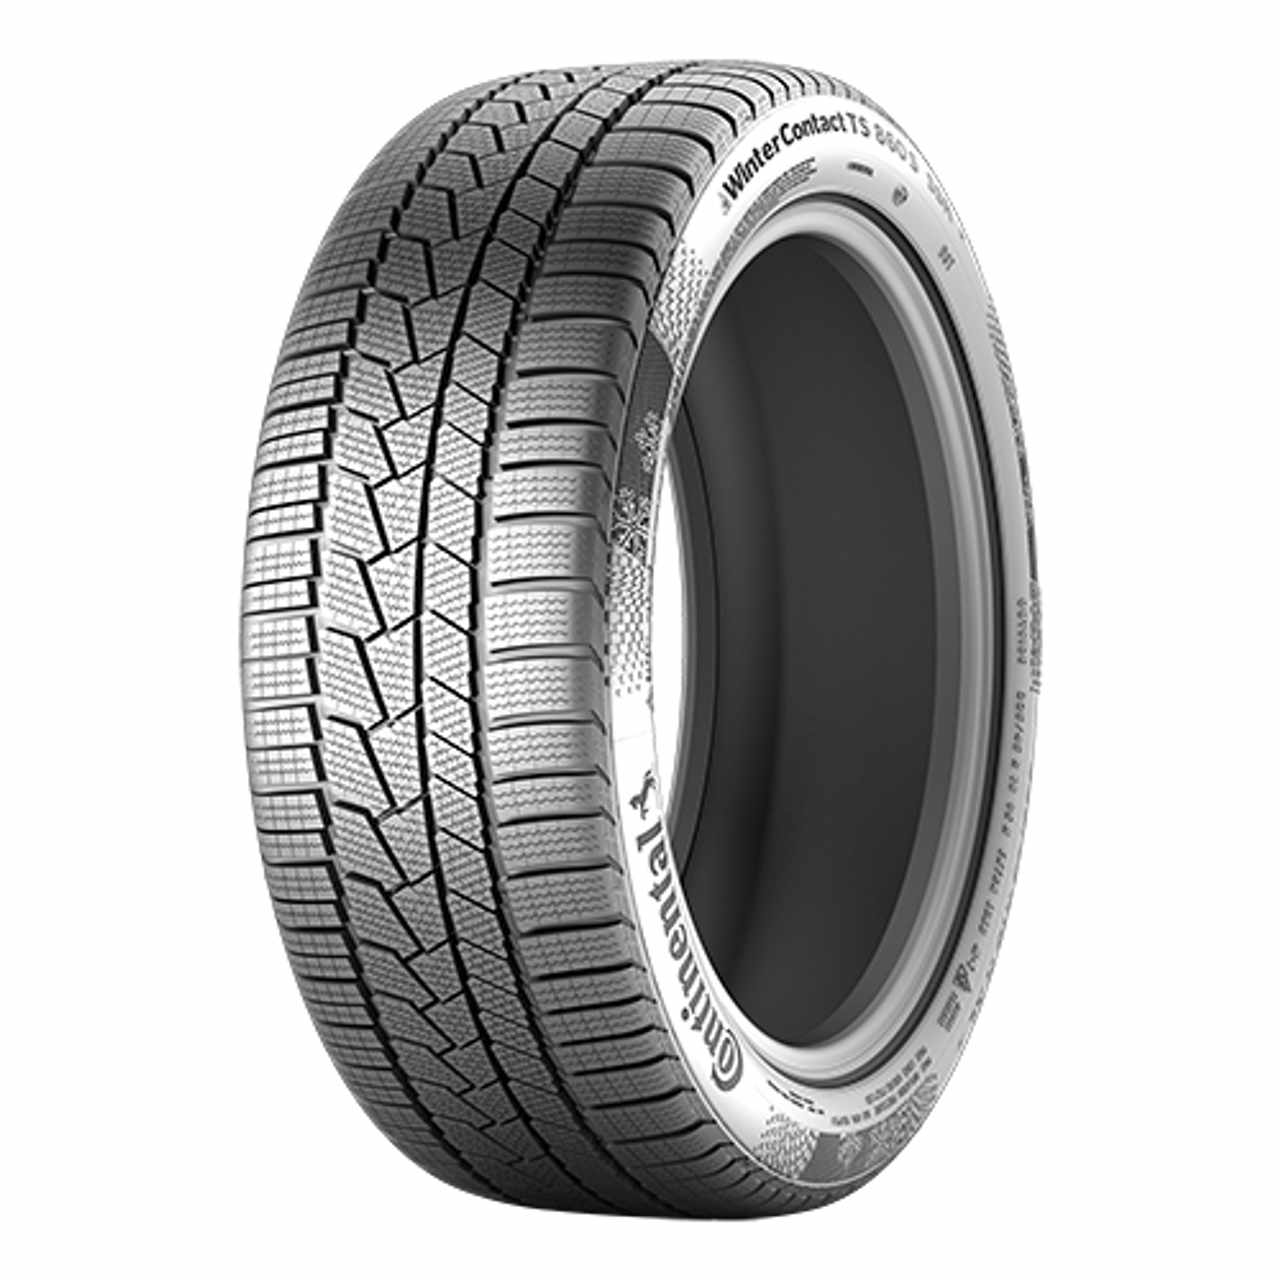 CONTINENTAL WINTERCONTACT TS 860 S (T0) (EVc) 235/45R18 98V FR BSW